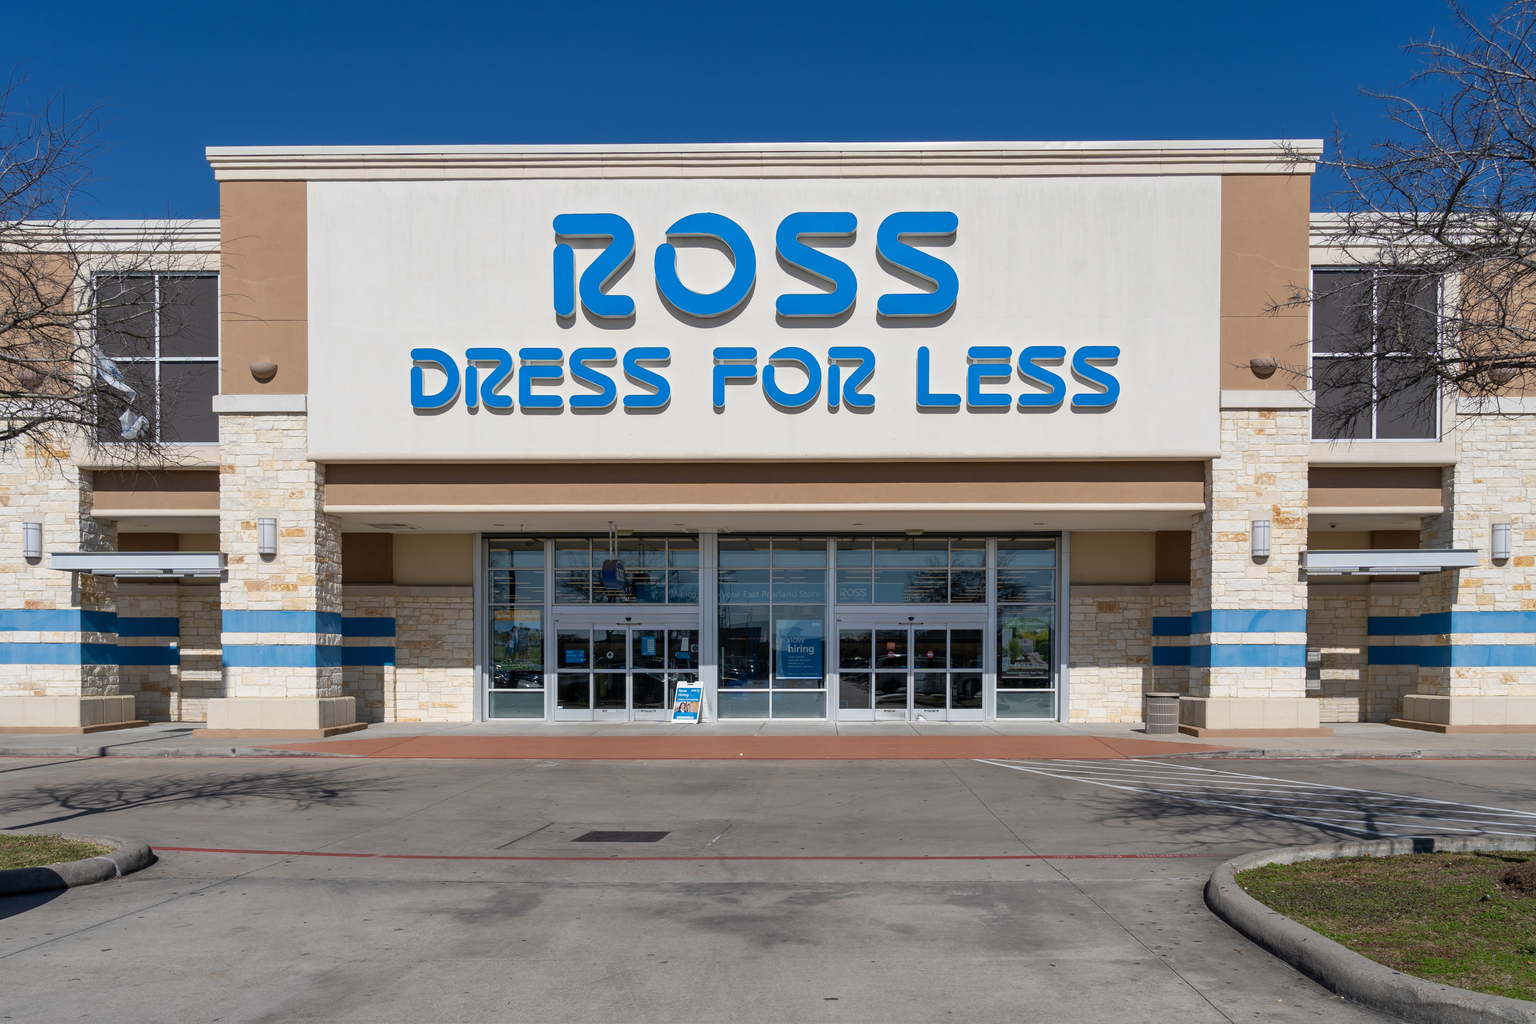 Where Does Ross Buy Their Inventory